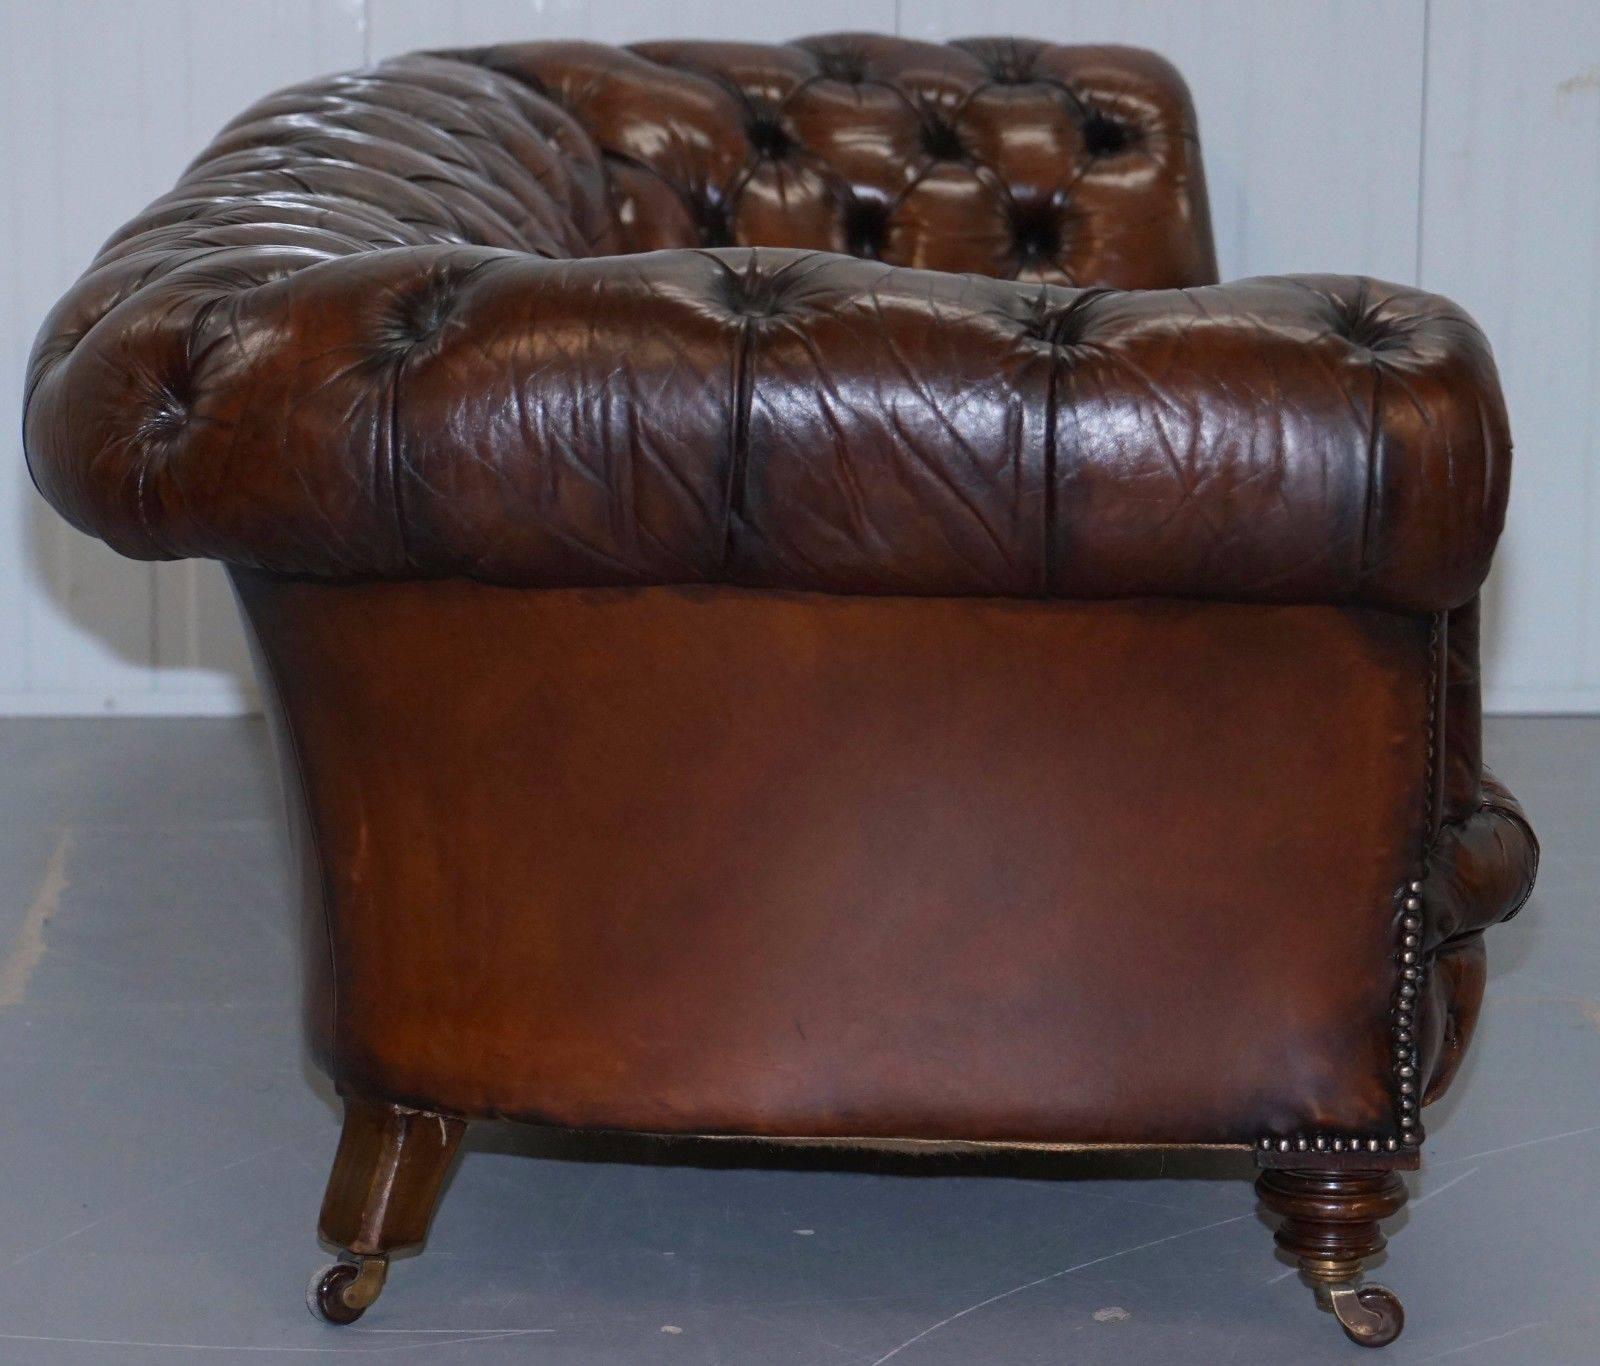 Hand-Carved Victorian 1890 Stamped Cornelius v Smith Chesterfield Leather Sofa Brown Leather